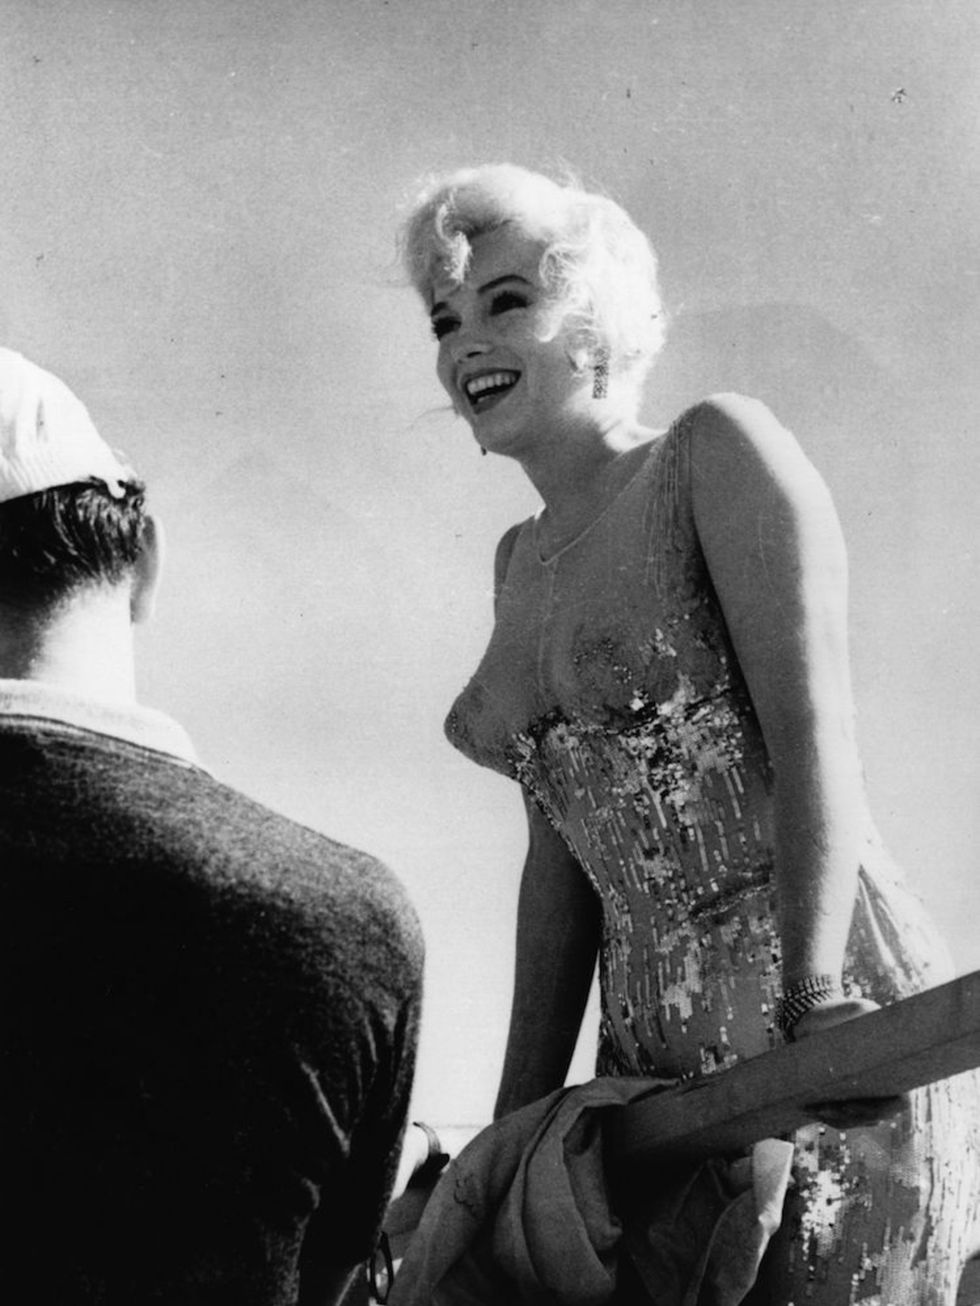 Marilyn Monroe, sex personified, wore a sheer naked-ish dress to the White House to sing that famous Happy Birthday rendition for JFK. Here she is, though, on the set of Some Like It Hot in a sheer Orry Kelly Costume in 1959.